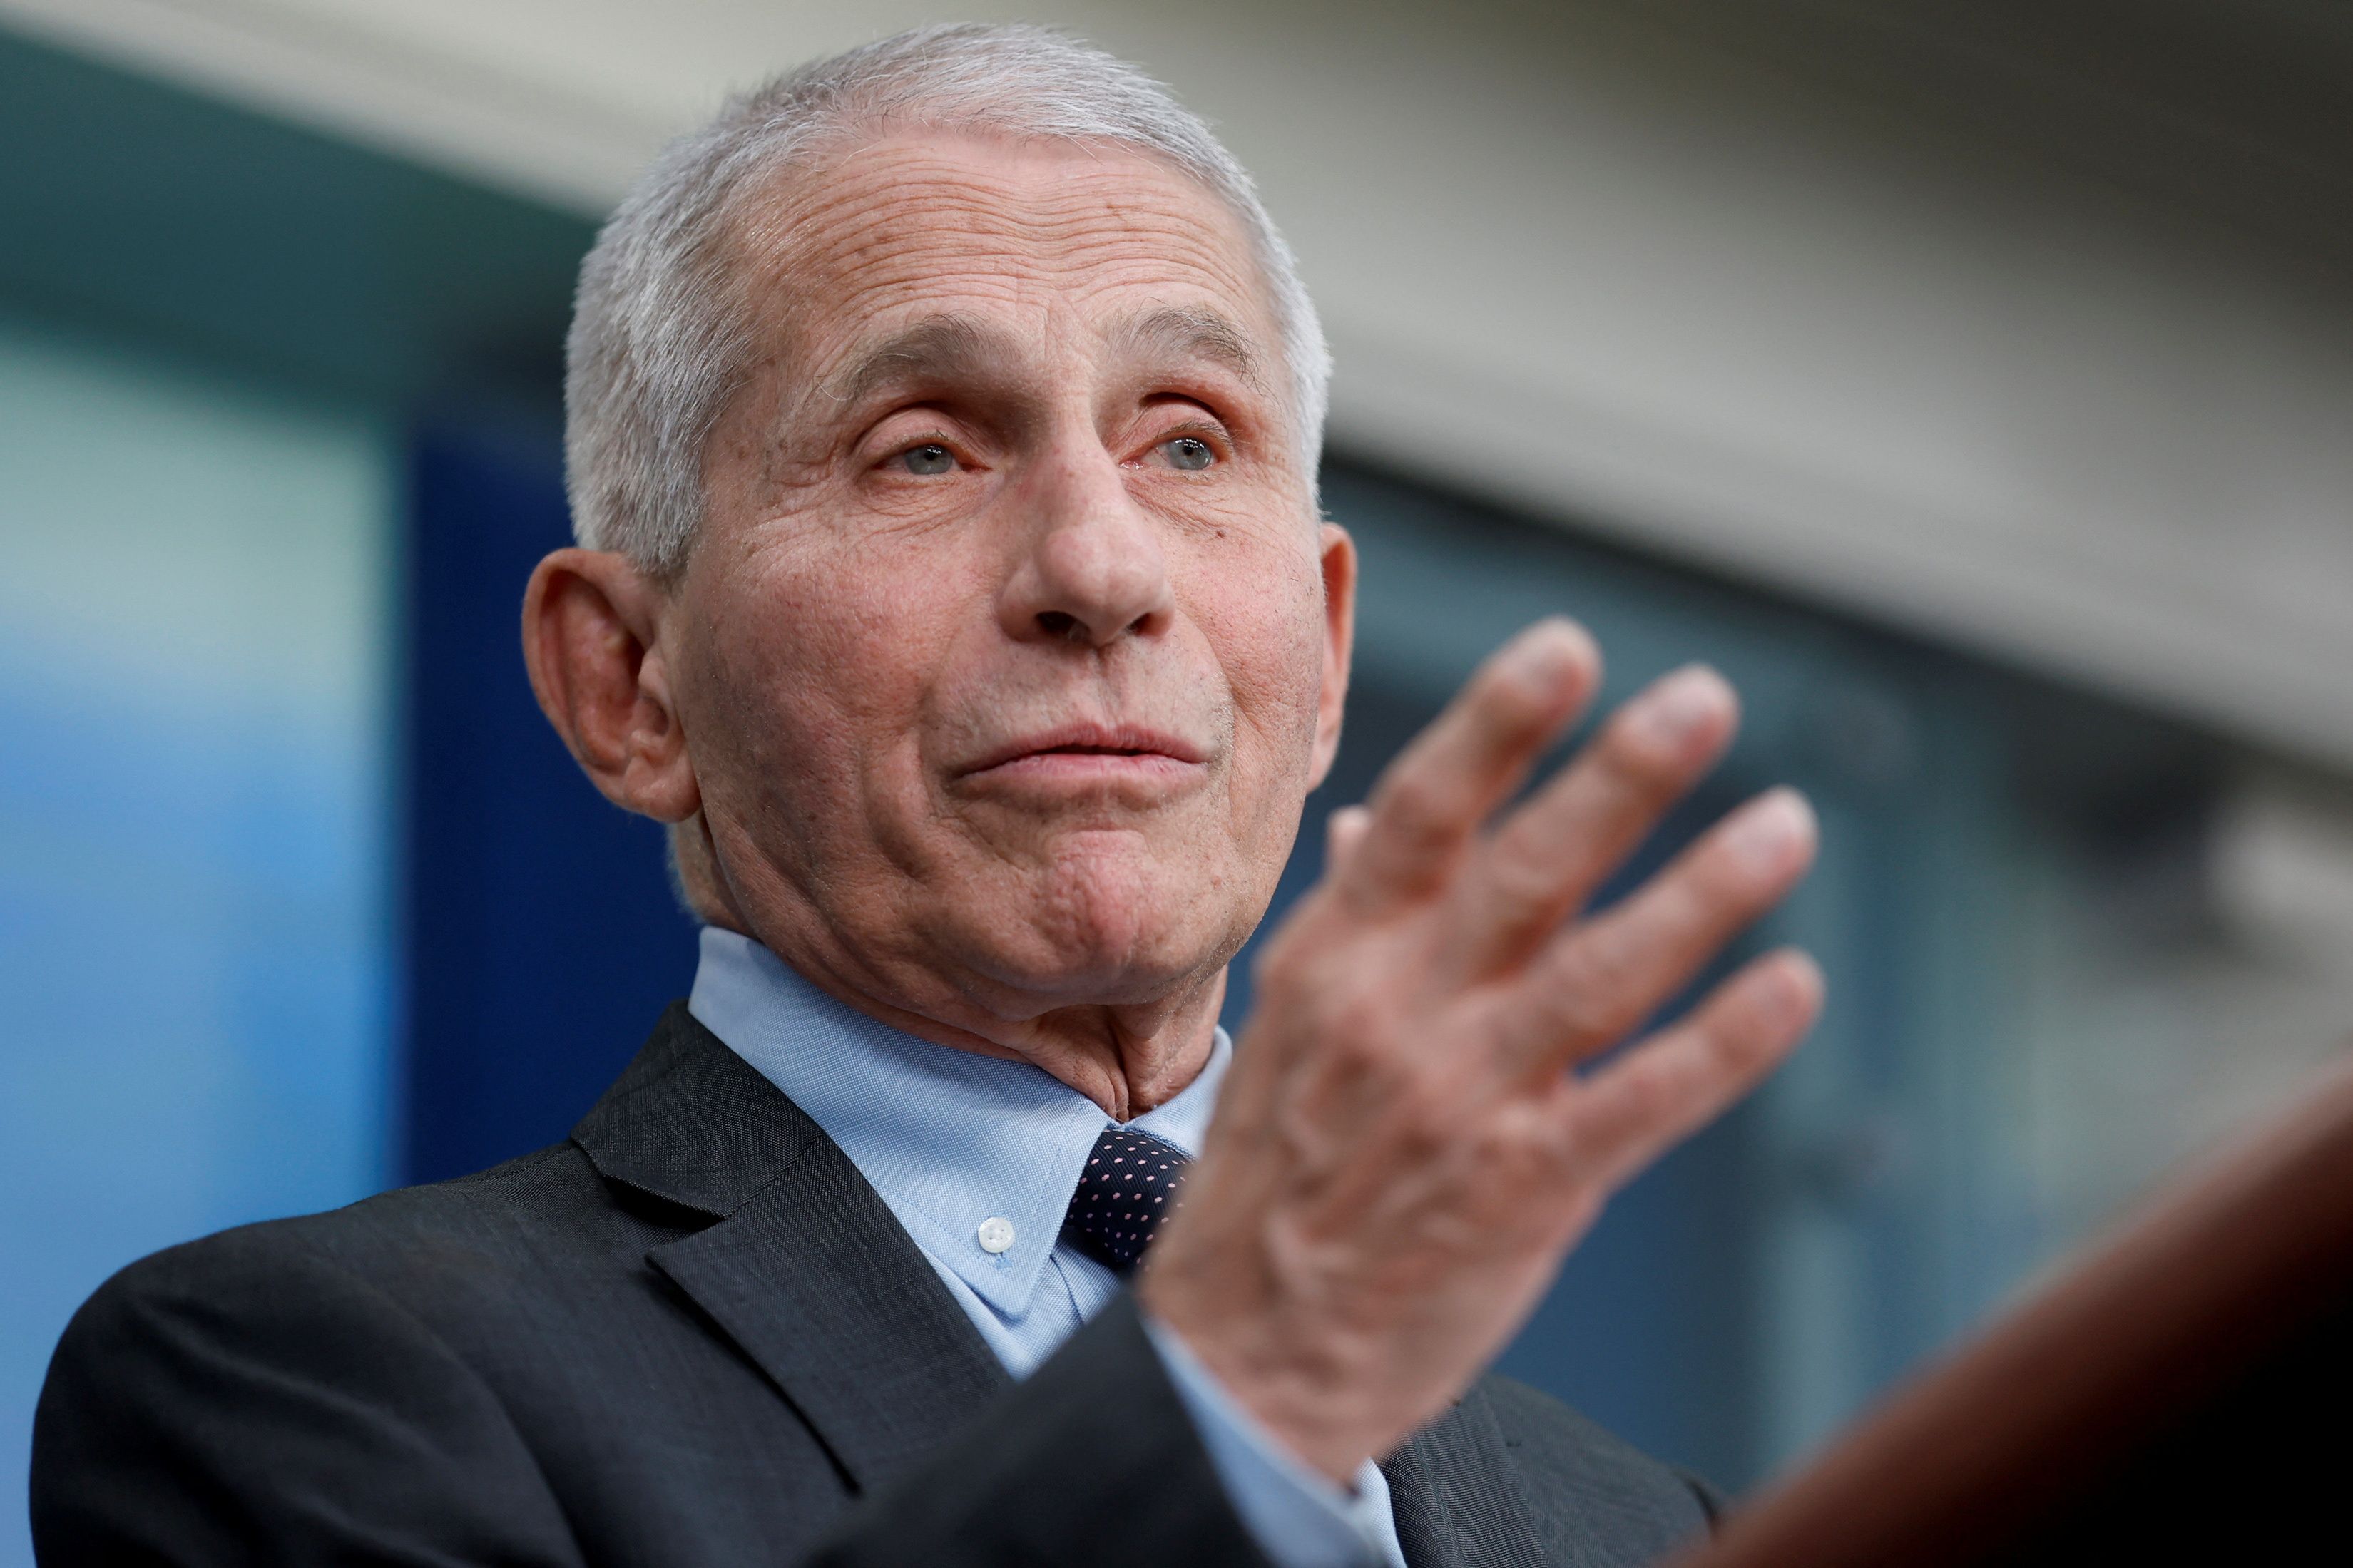 NIH's Fauci joins White House Press Secretary Jean-Pierre for the daily press briefing at the White House in Washington